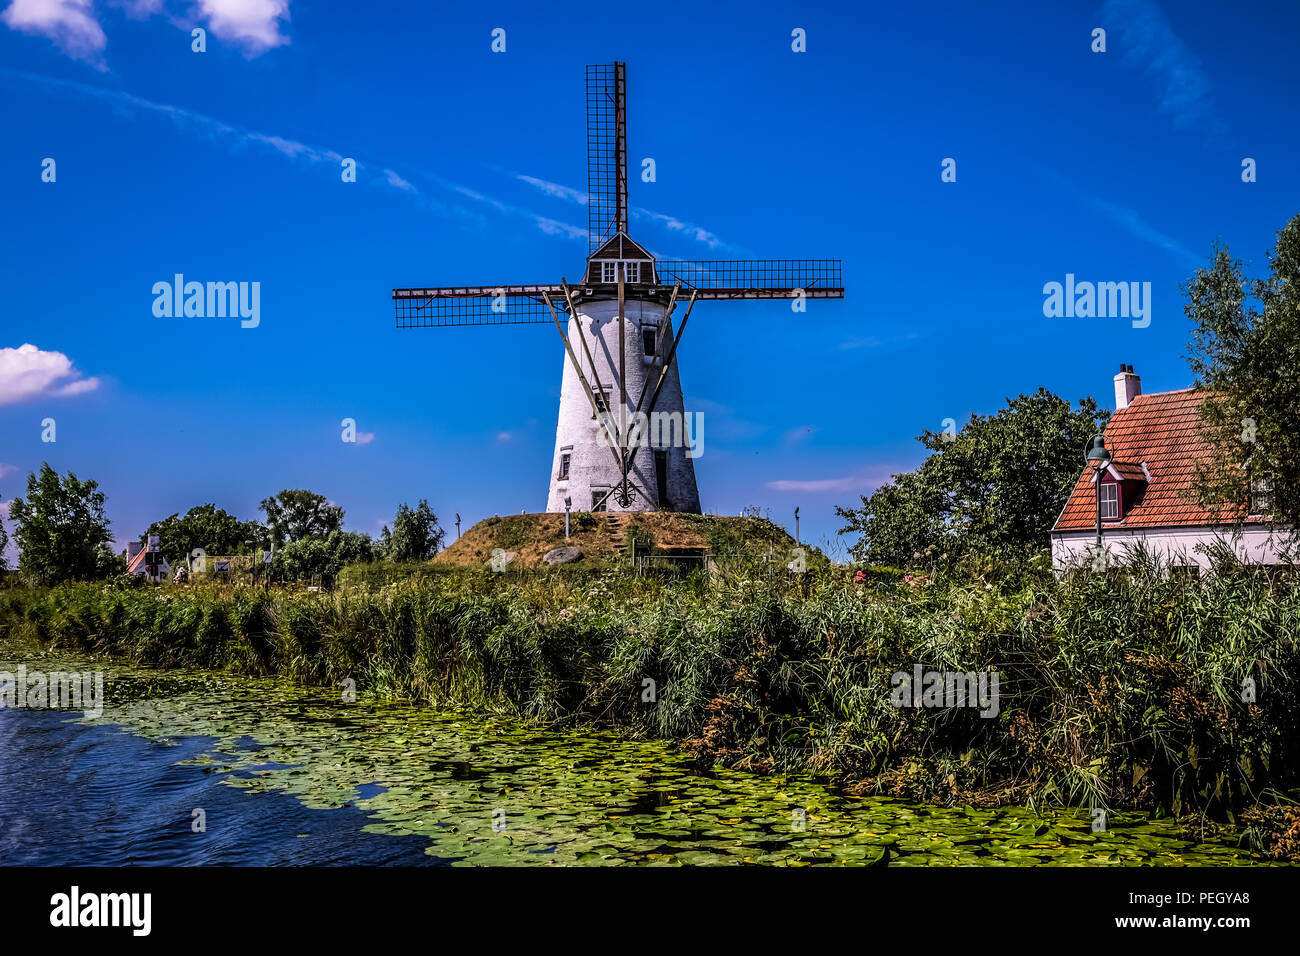 Landscape view of the The windmill of Hoeke, in the city of Damme near Bruges in northern Belgium, with cloudy sky in the background Stock Photo